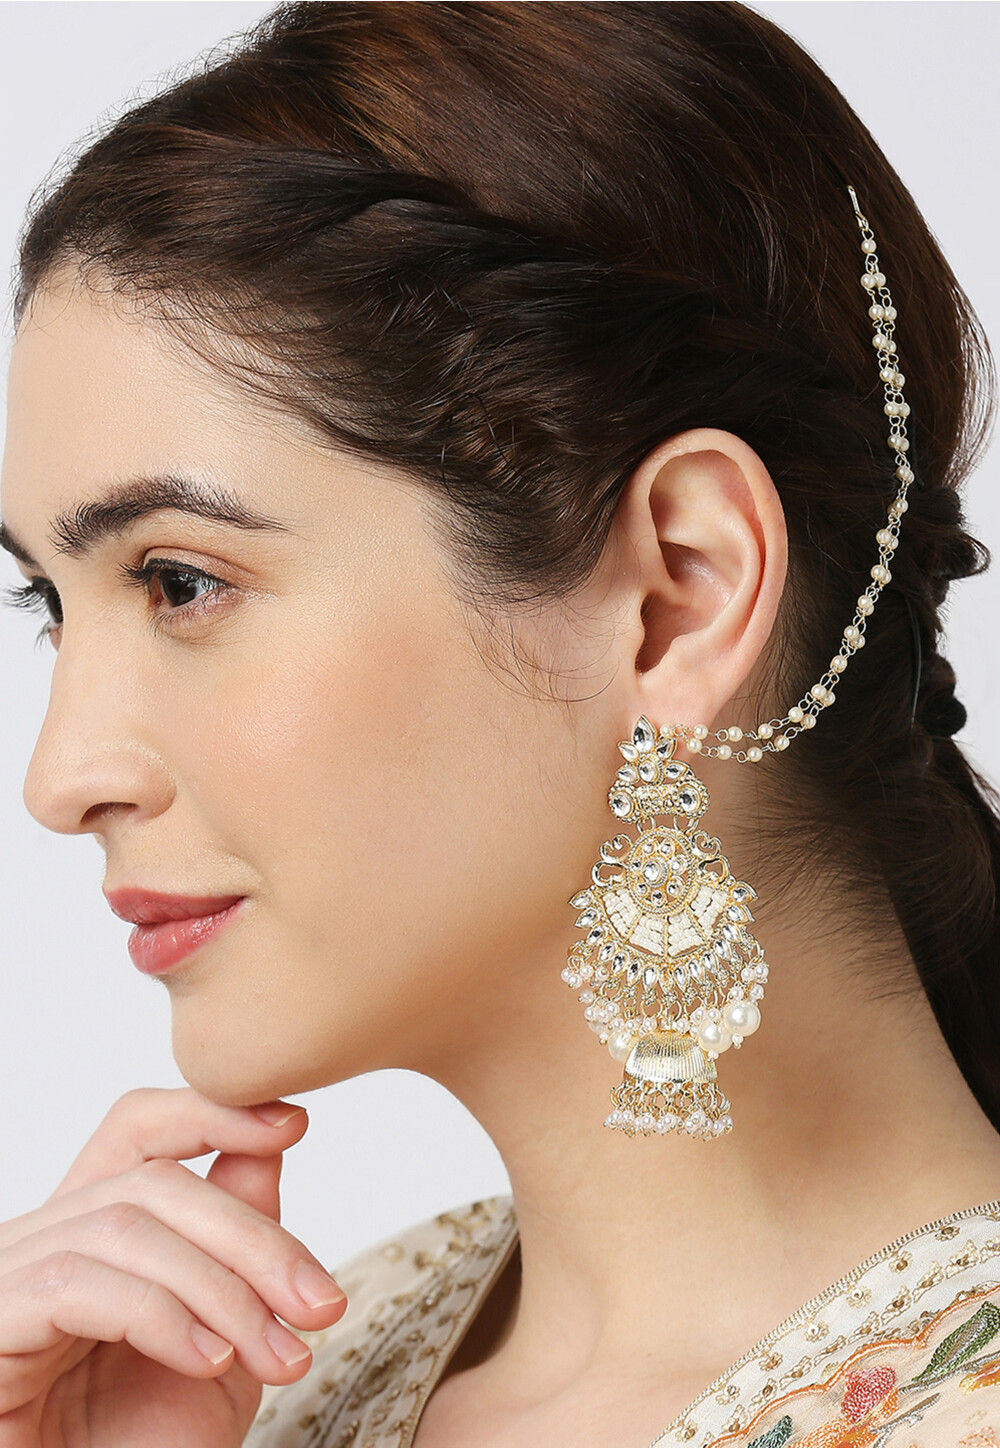 Flipkartcom  Buy JEWELS GURU Classic Designed Gold Plated Jhumka Earrings  With Chain Tassel For Women And Girls Cubic Zirconia Beads Alloy Jhumki  Earring Online at Best Prices in India